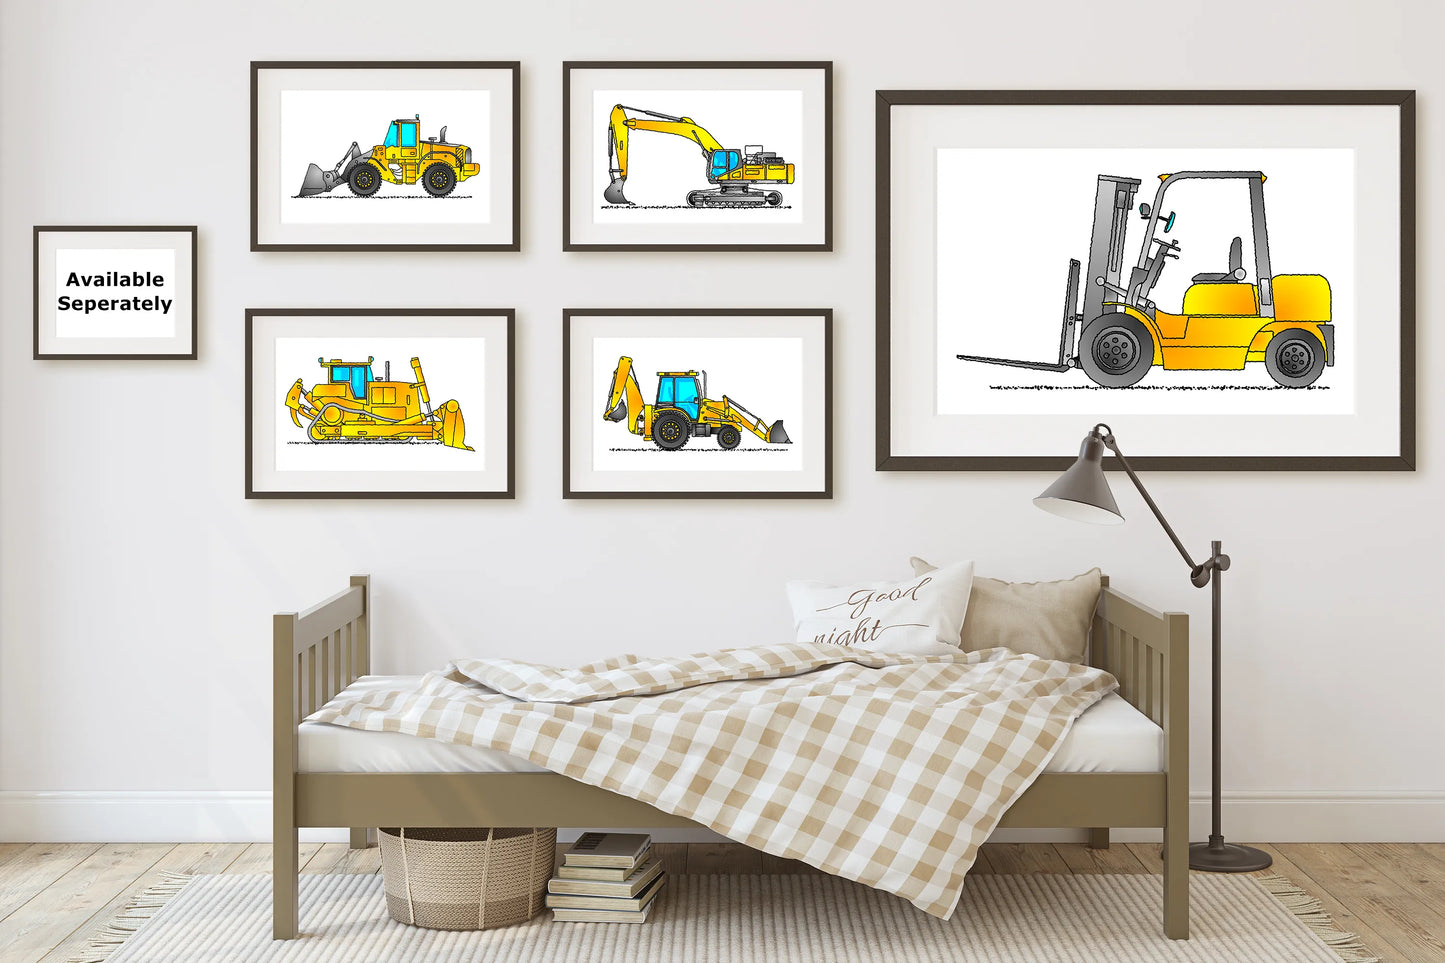 Forklift Truck Print. Qualified Licensed Operator Poster Download E014